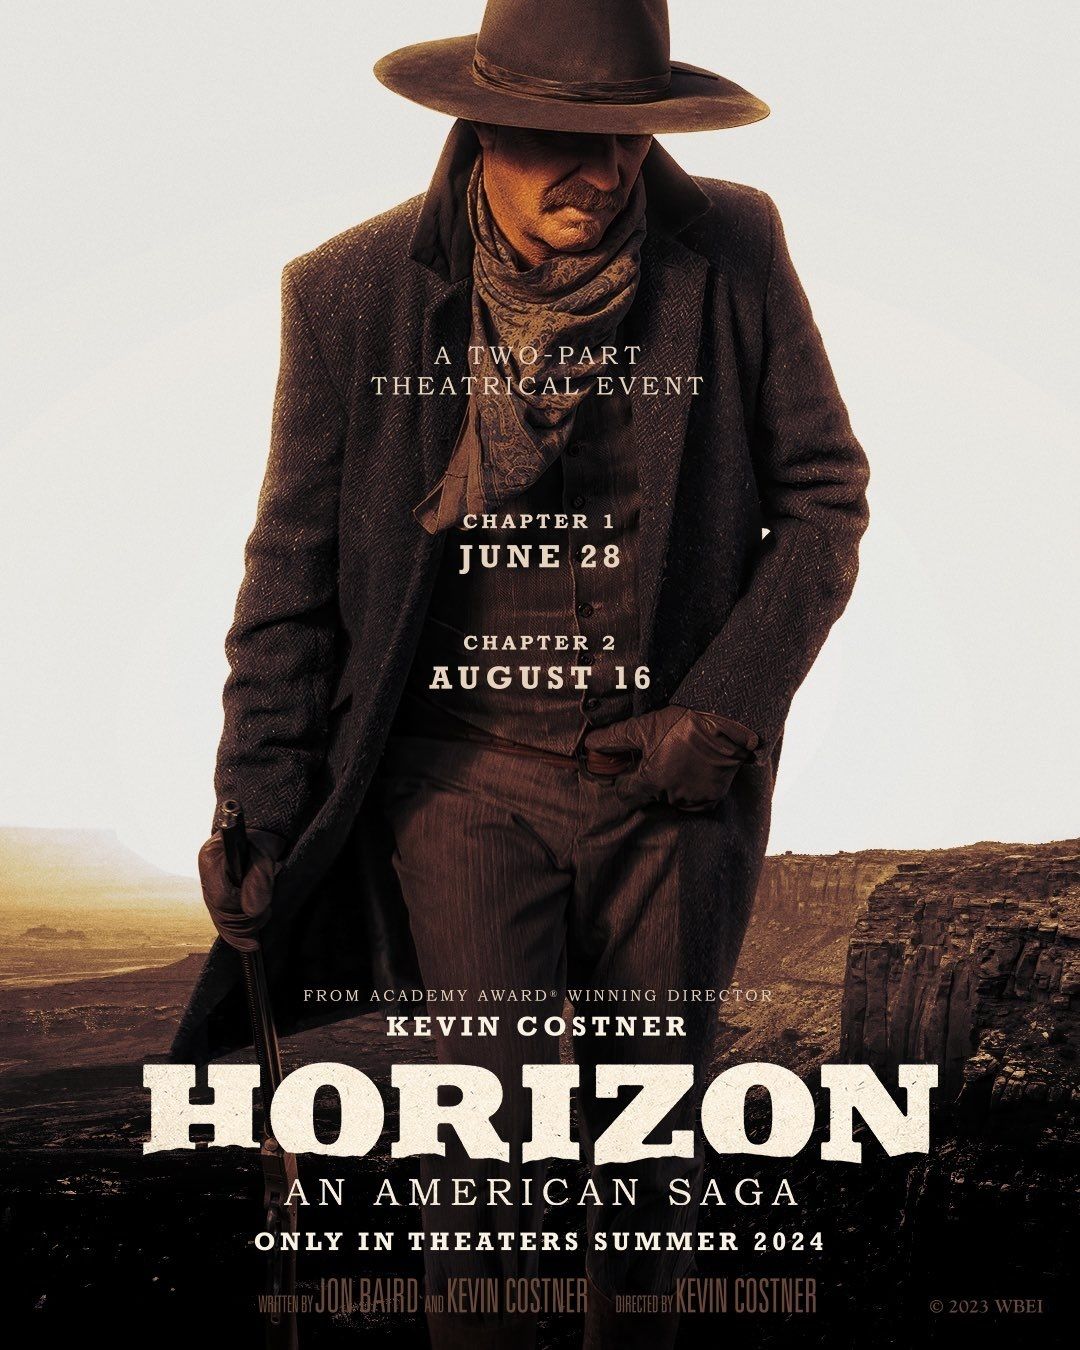 Kevin Costner’s TwoPart ‘Horizon An American Saga’ to Be Released in 2024